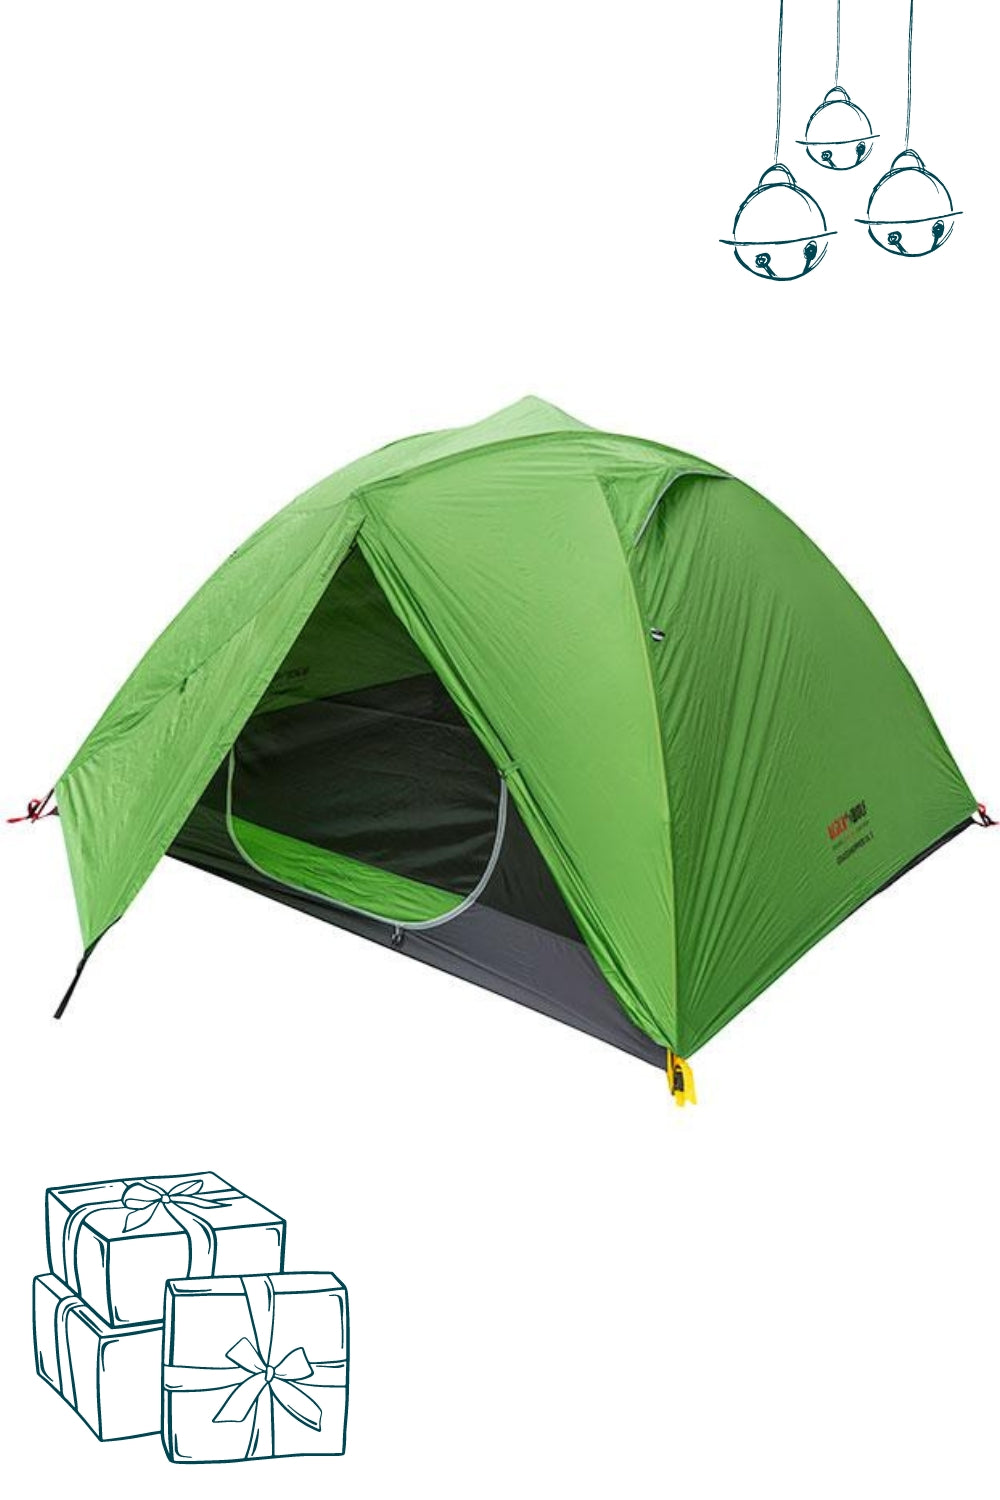 Day Four: Wasp Hiking Tent